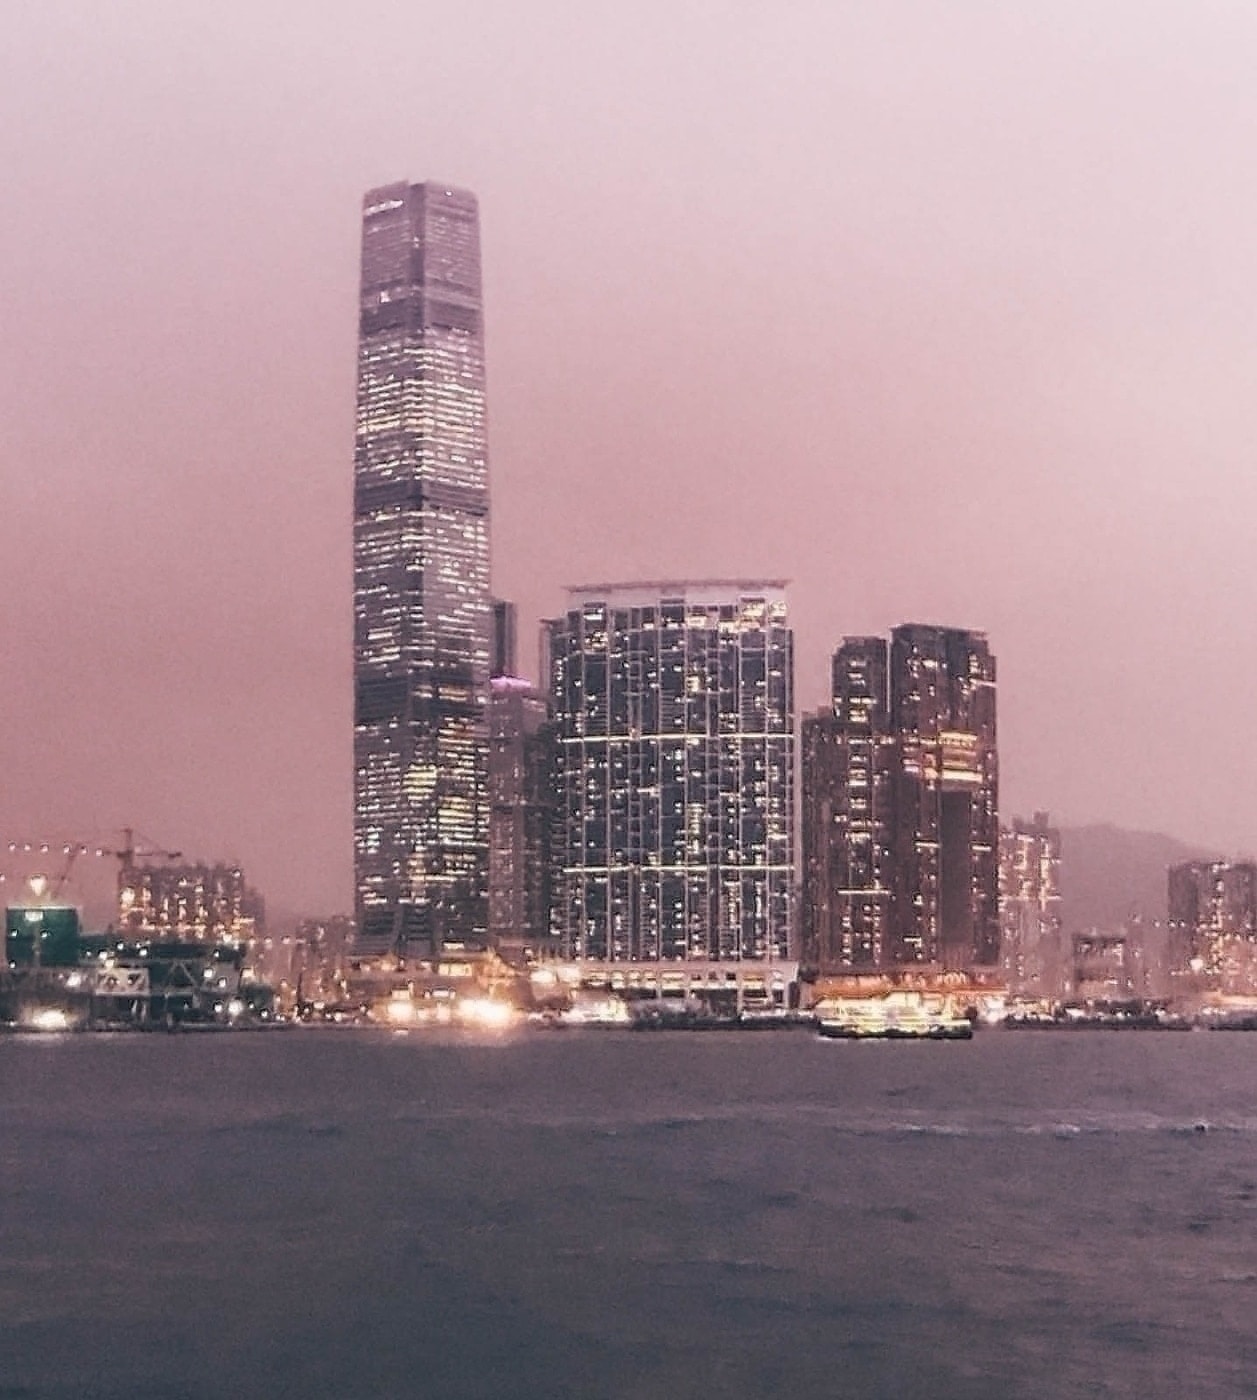 View from the Kowloon Ferry